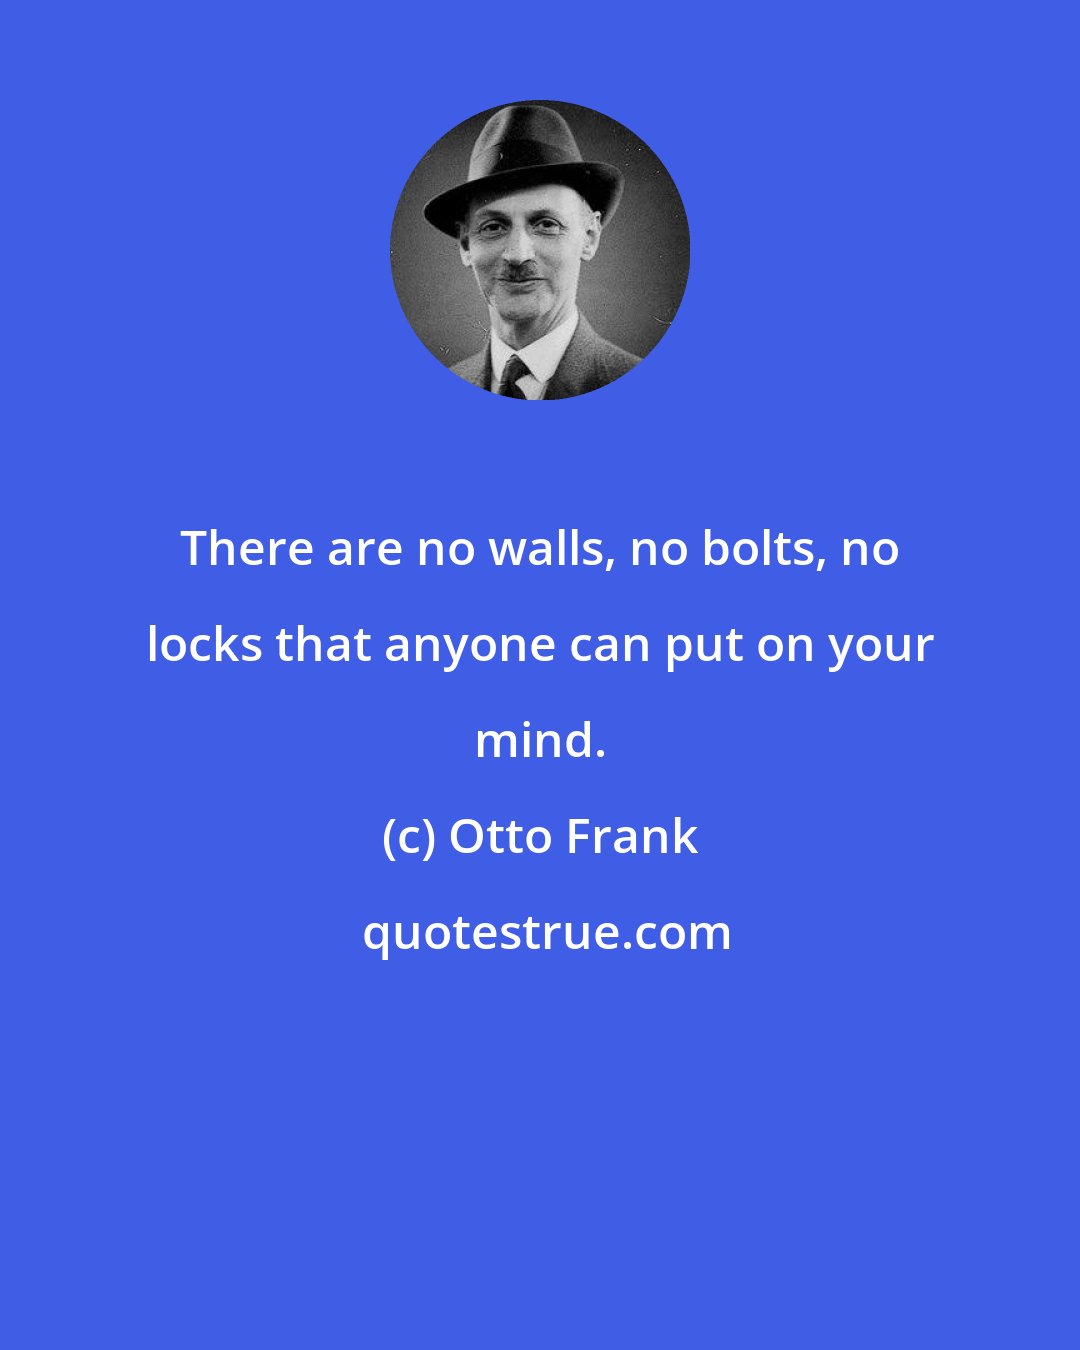 Otto Frank: There are no walls, no bolts, no locks that anyone can put on your mind.